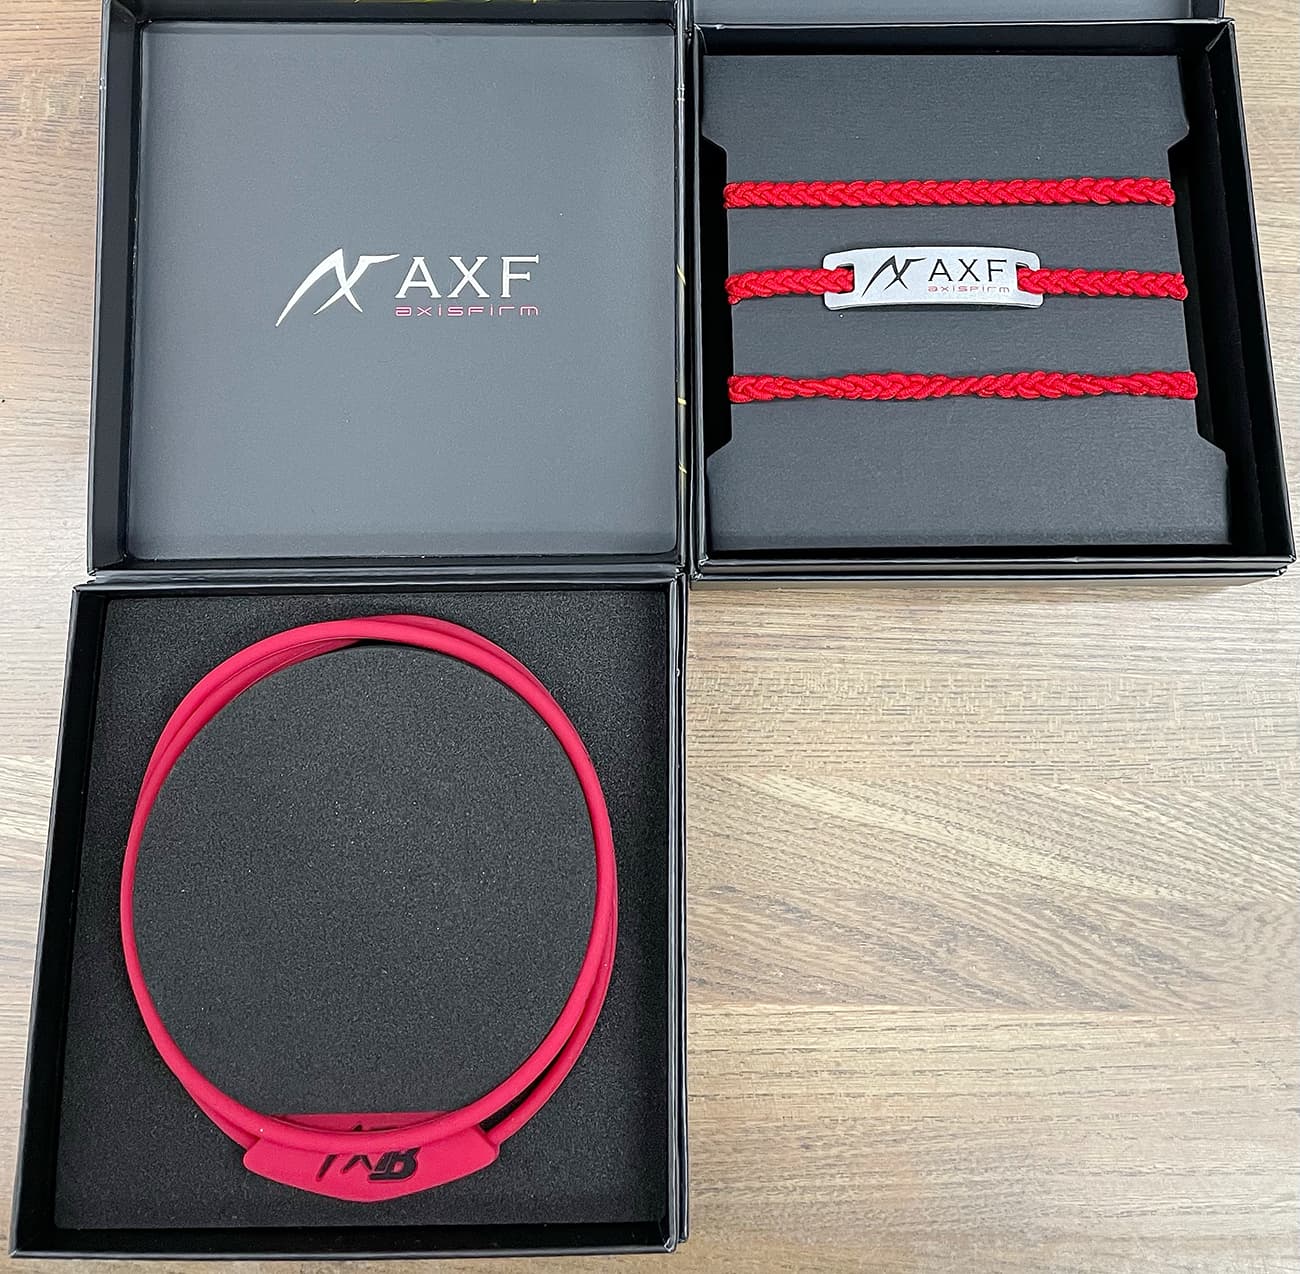 AXF（AXISFIRM）アクセフ　COLOR BAND（カラーバンド）2